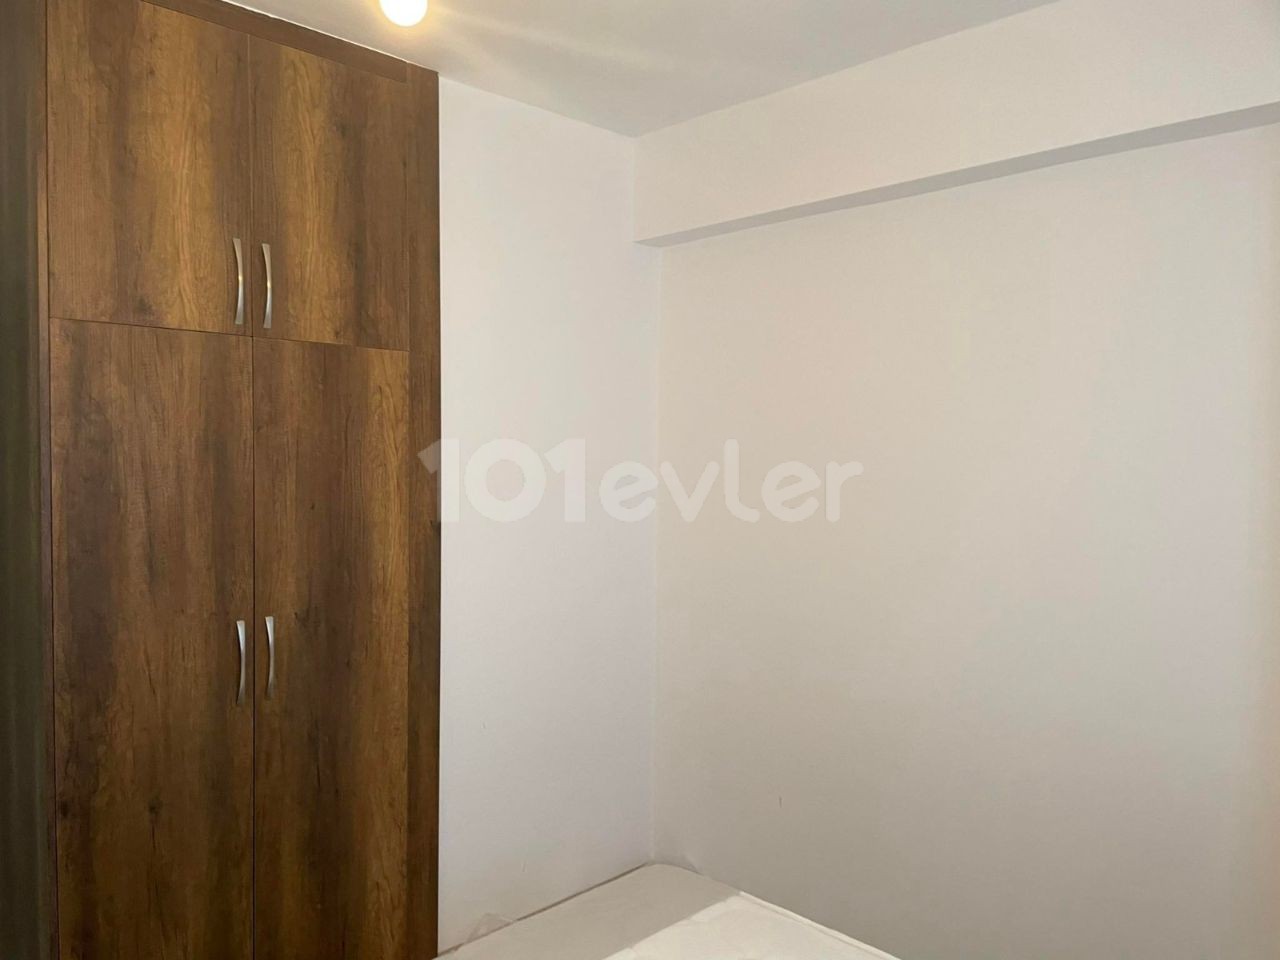 95 M2 2 + 1 OPPORTUNITY APARTMENT ON THE 2ND FLOOR OF A FULLY FURNISHED AND WELL-MAINTAINED ELEVATOR BUILDING CLOSE TO EVERYWHERE IN THE MOST POPULAR NEIGHBORHOOD IN THE CENTER OF GUINEA. . BLACK DISHWASHER IN THE KITCHEN, BUILT-IN SET, LARGE WARDROBE IN THE BEDROOM, AIR CONDITIONING IN EVERY ROOM